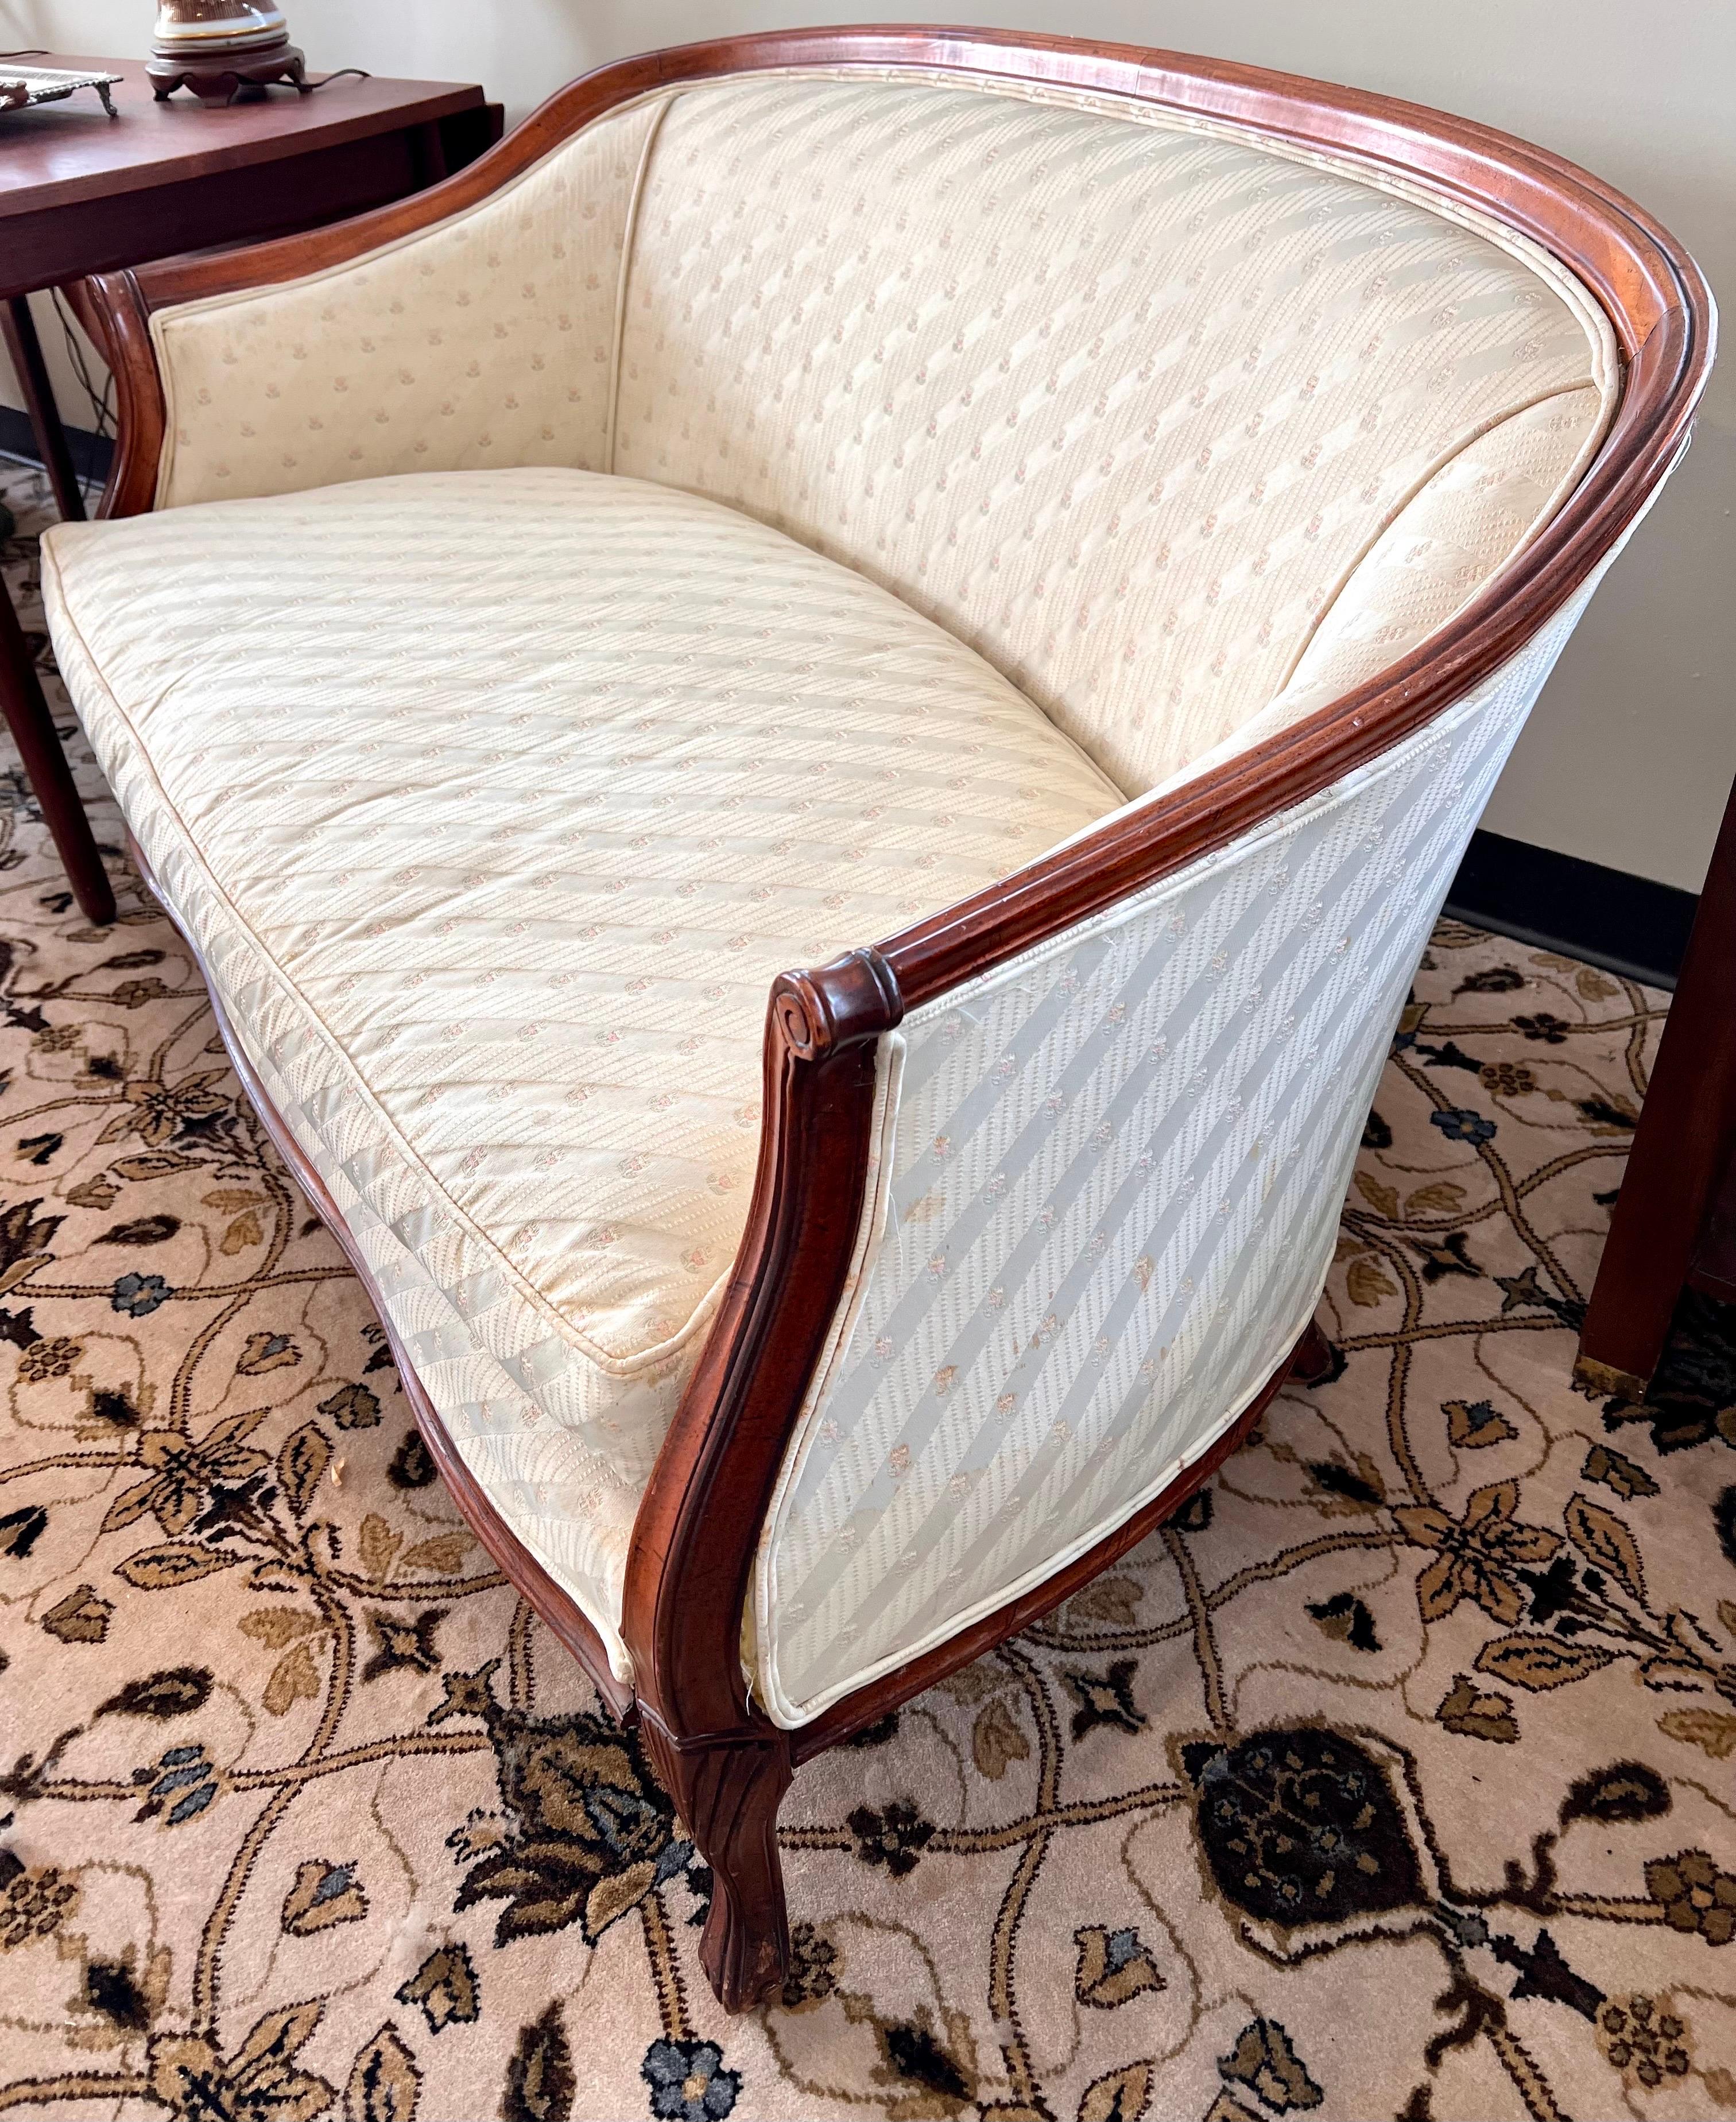 Lovely French Louis XVI style mahogany settee upholstered in a cream print fabric. Single down cushion.